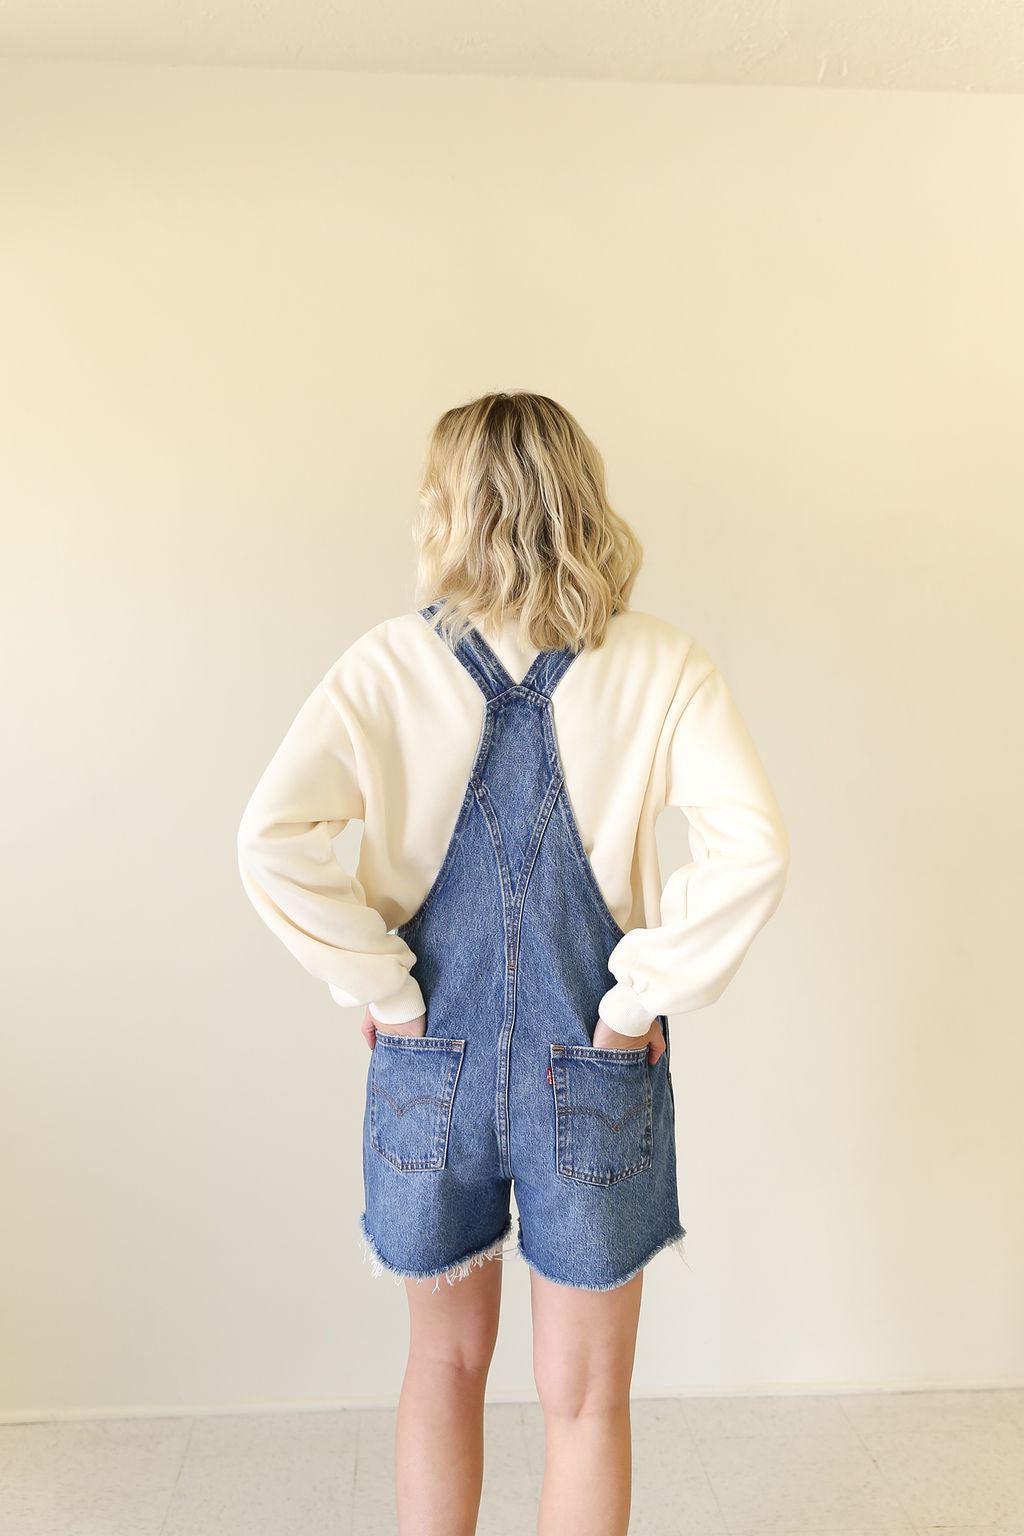 Vintage Meadow Games Shortalls by Levi's